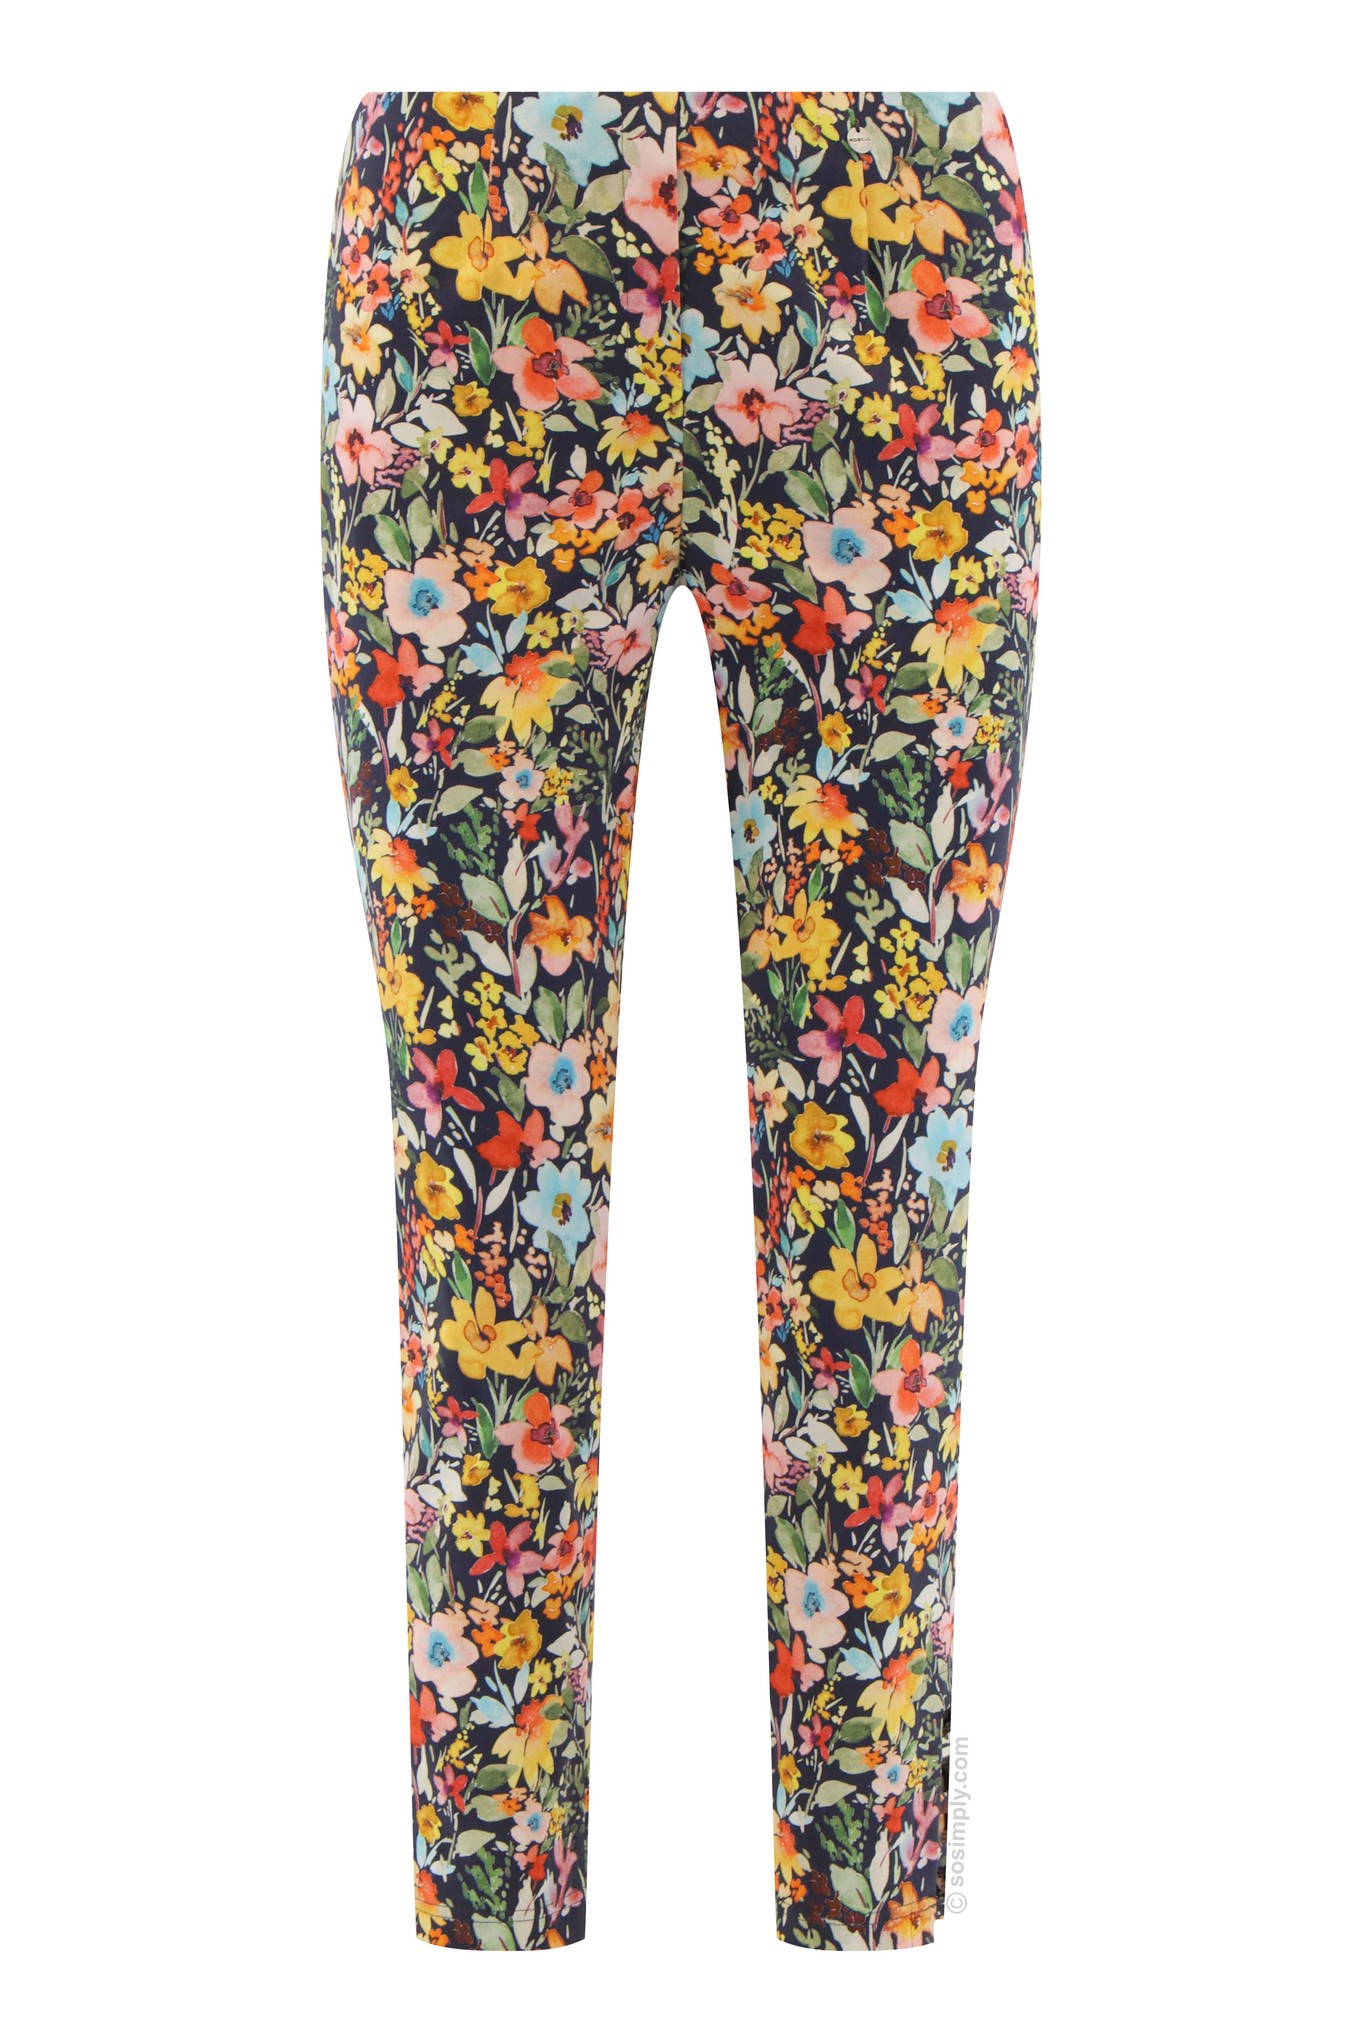 Robell Lena 09 Floral Frenzy Ankle Grazers